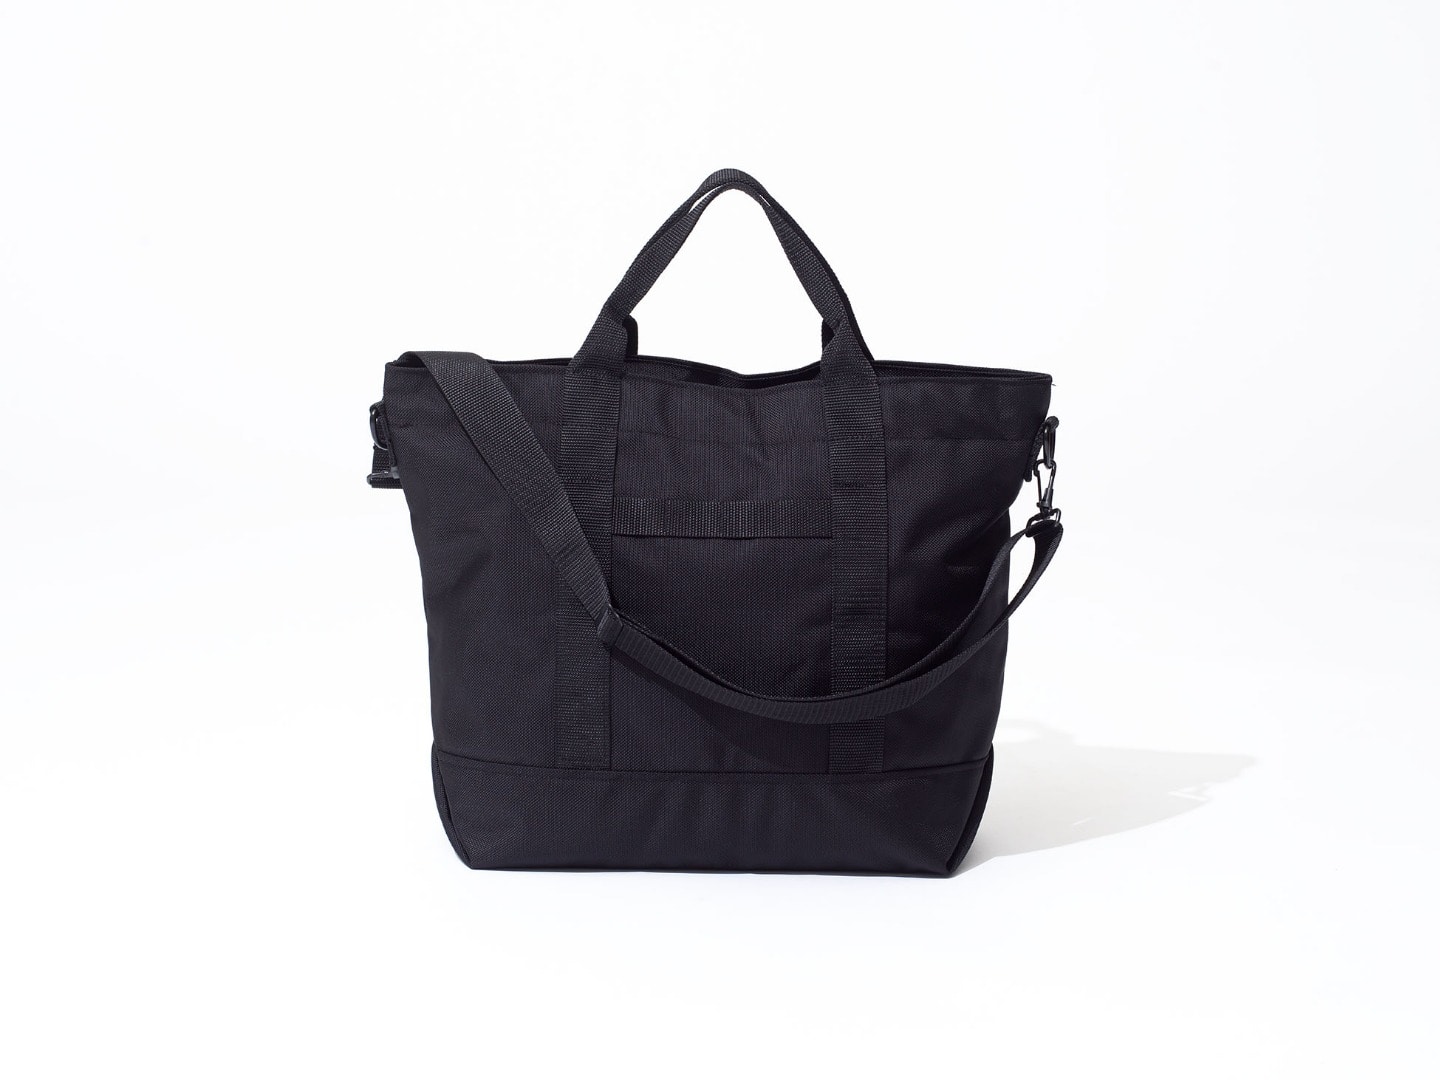 JIM MELVILLE for Ron Herman Bag Collection 8.11(Fri) New Arrival 